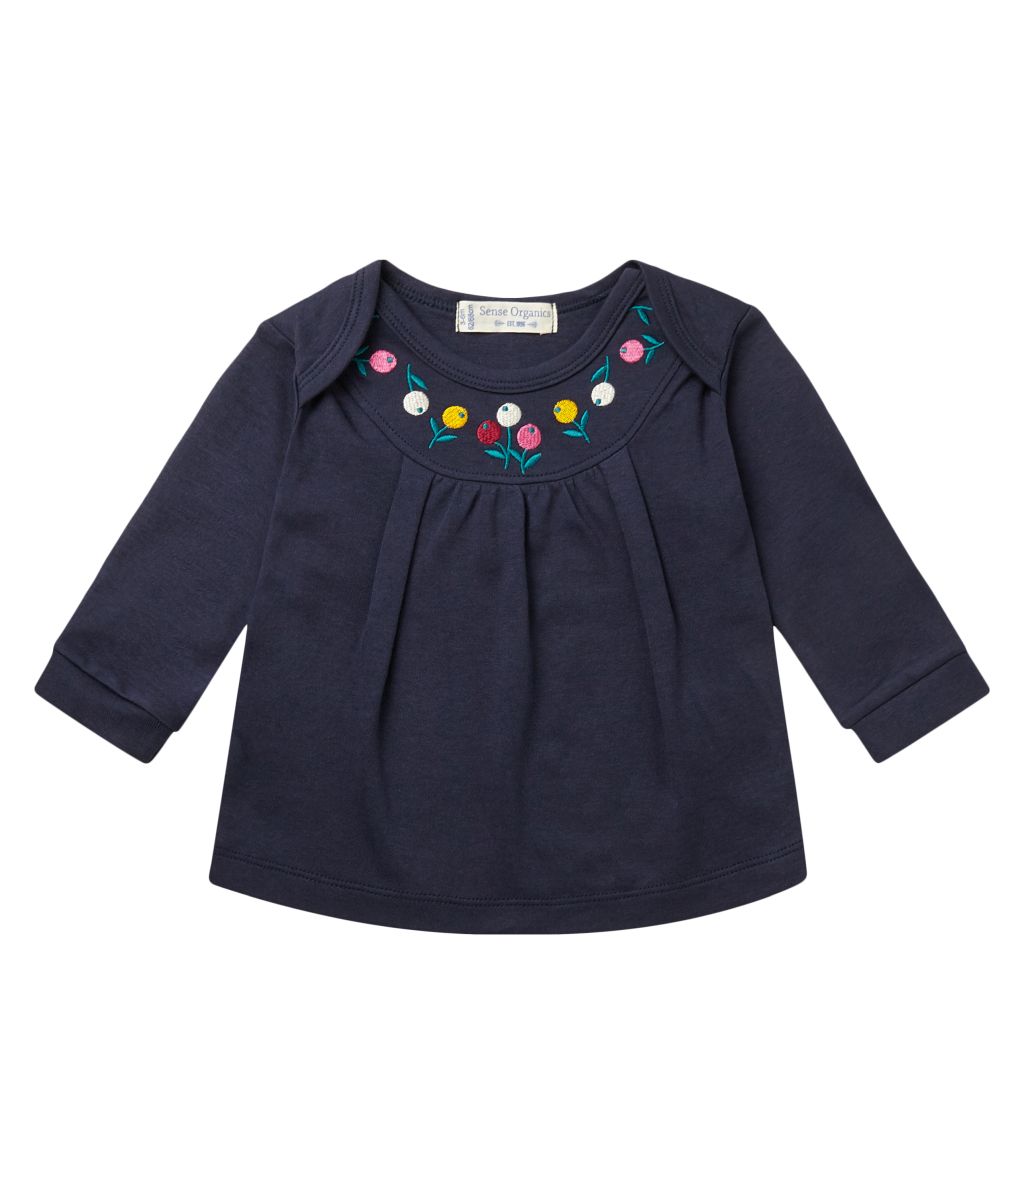 Luisa Baby Shirt L/S navy+flower embroidery